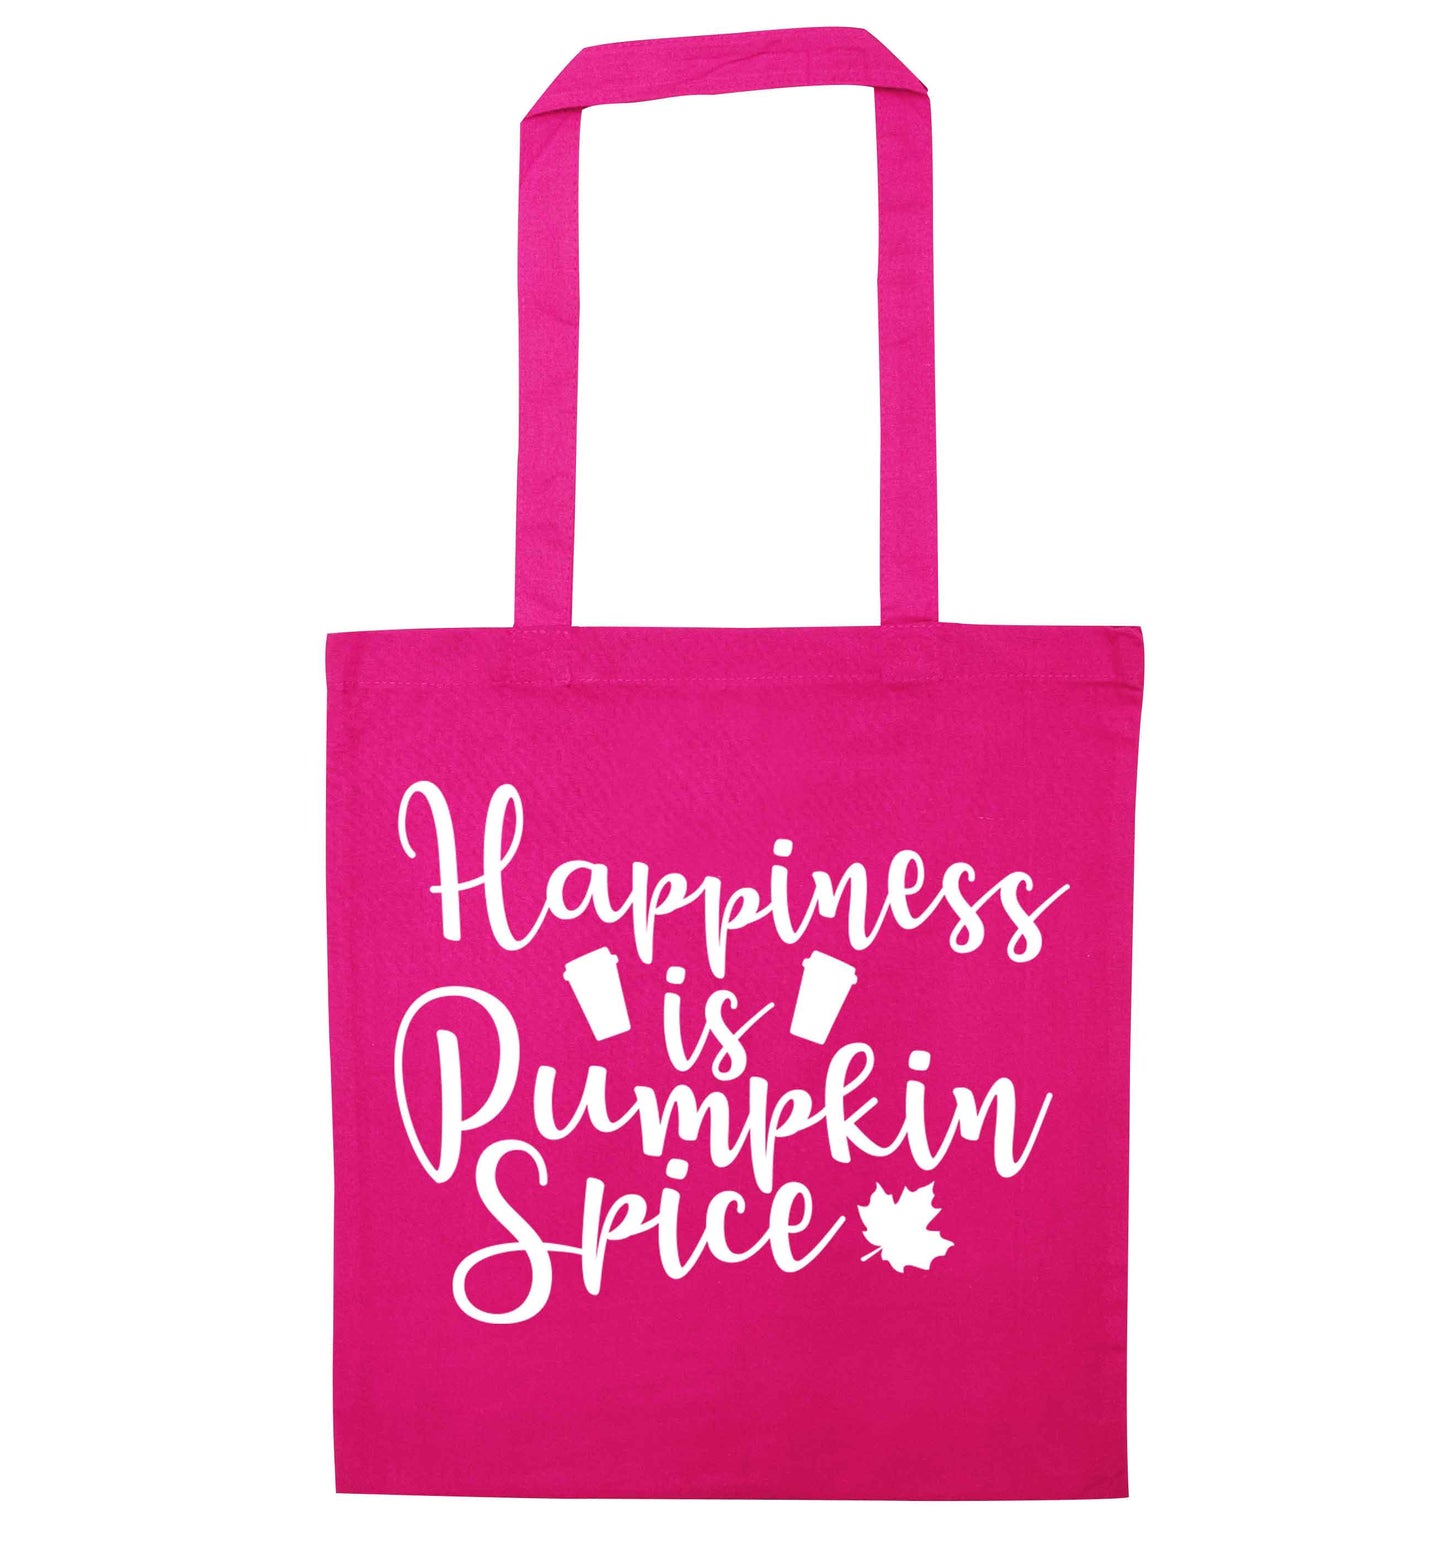 Happiness Pumpkin Spice pink tote bag